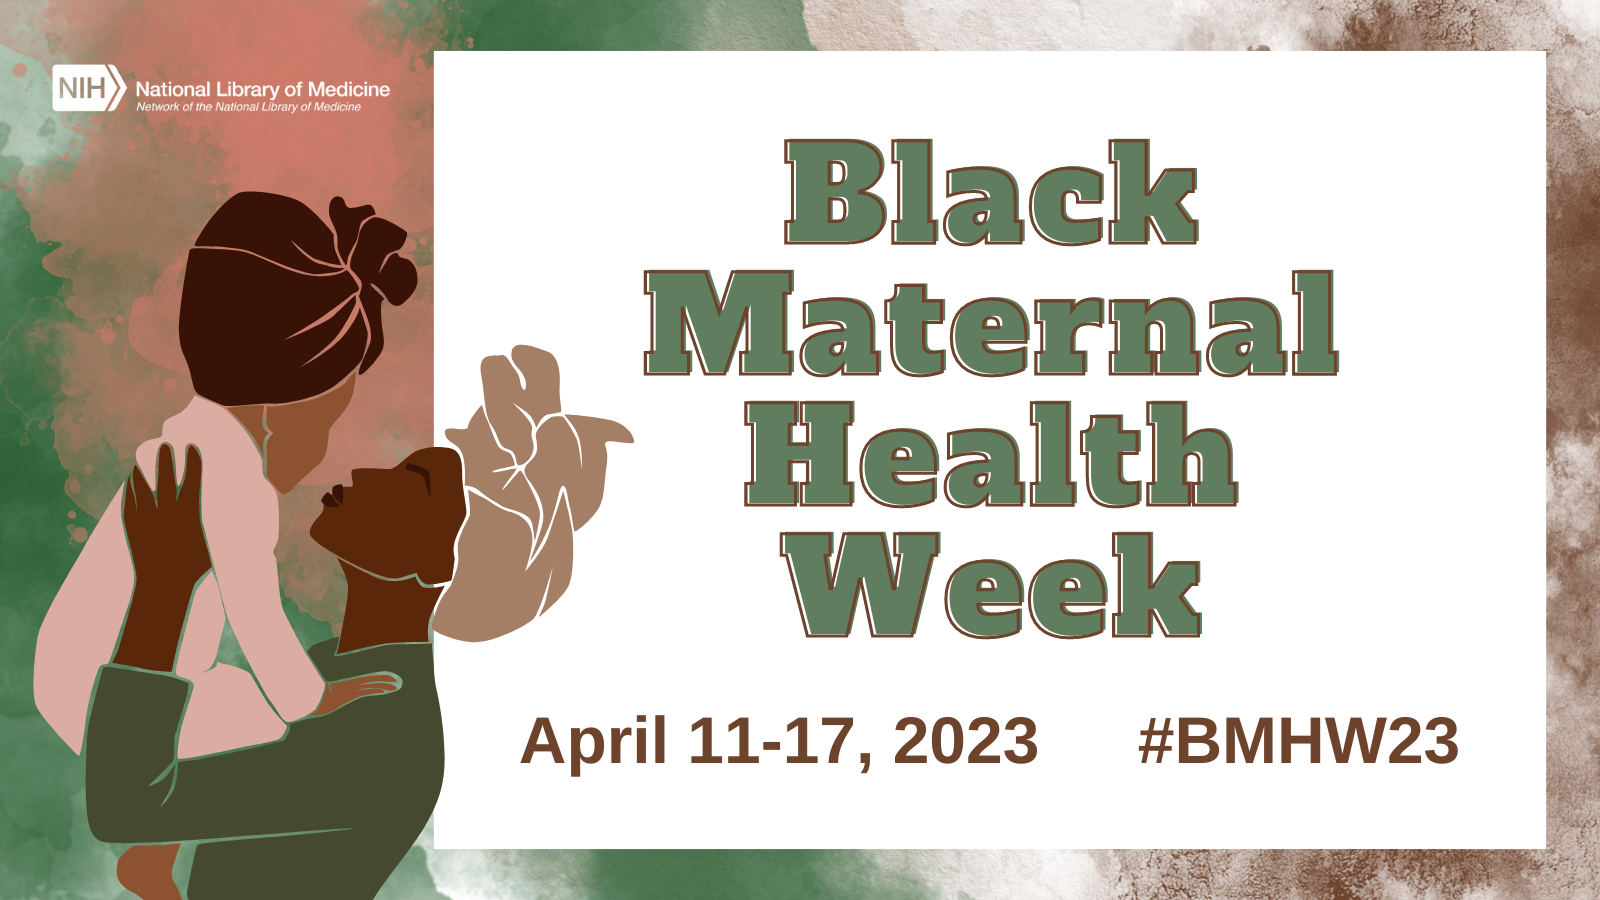 Stylized graphic of a mother holding up a baby in hues of pink, green, and brown. Graphic promotes NNLM’s programming for Black Maternal Health Week, April 11-17, 2023. 